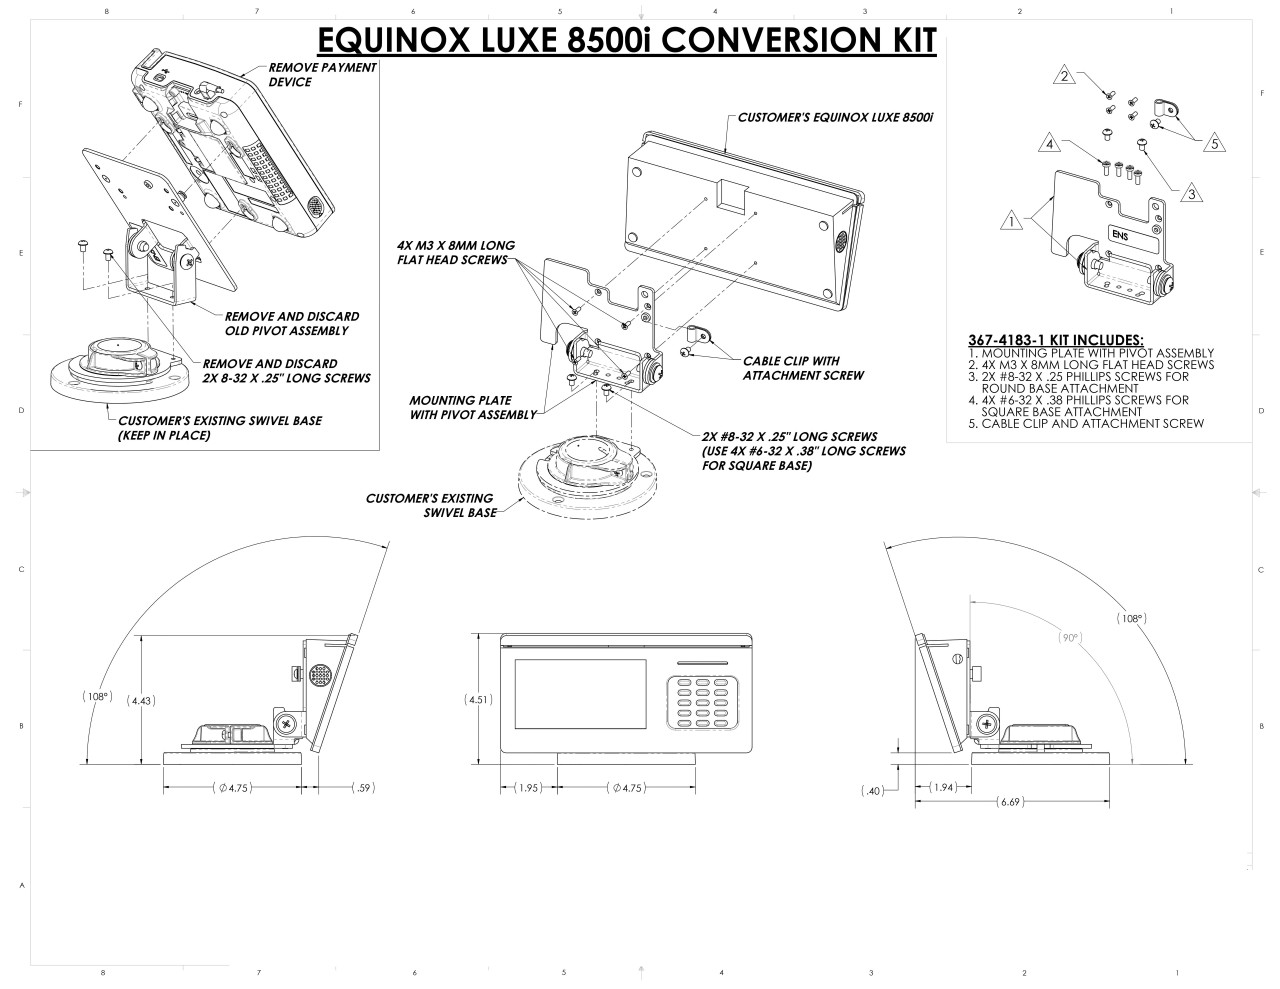 Equinox LUXE 8500i Conversion Kit